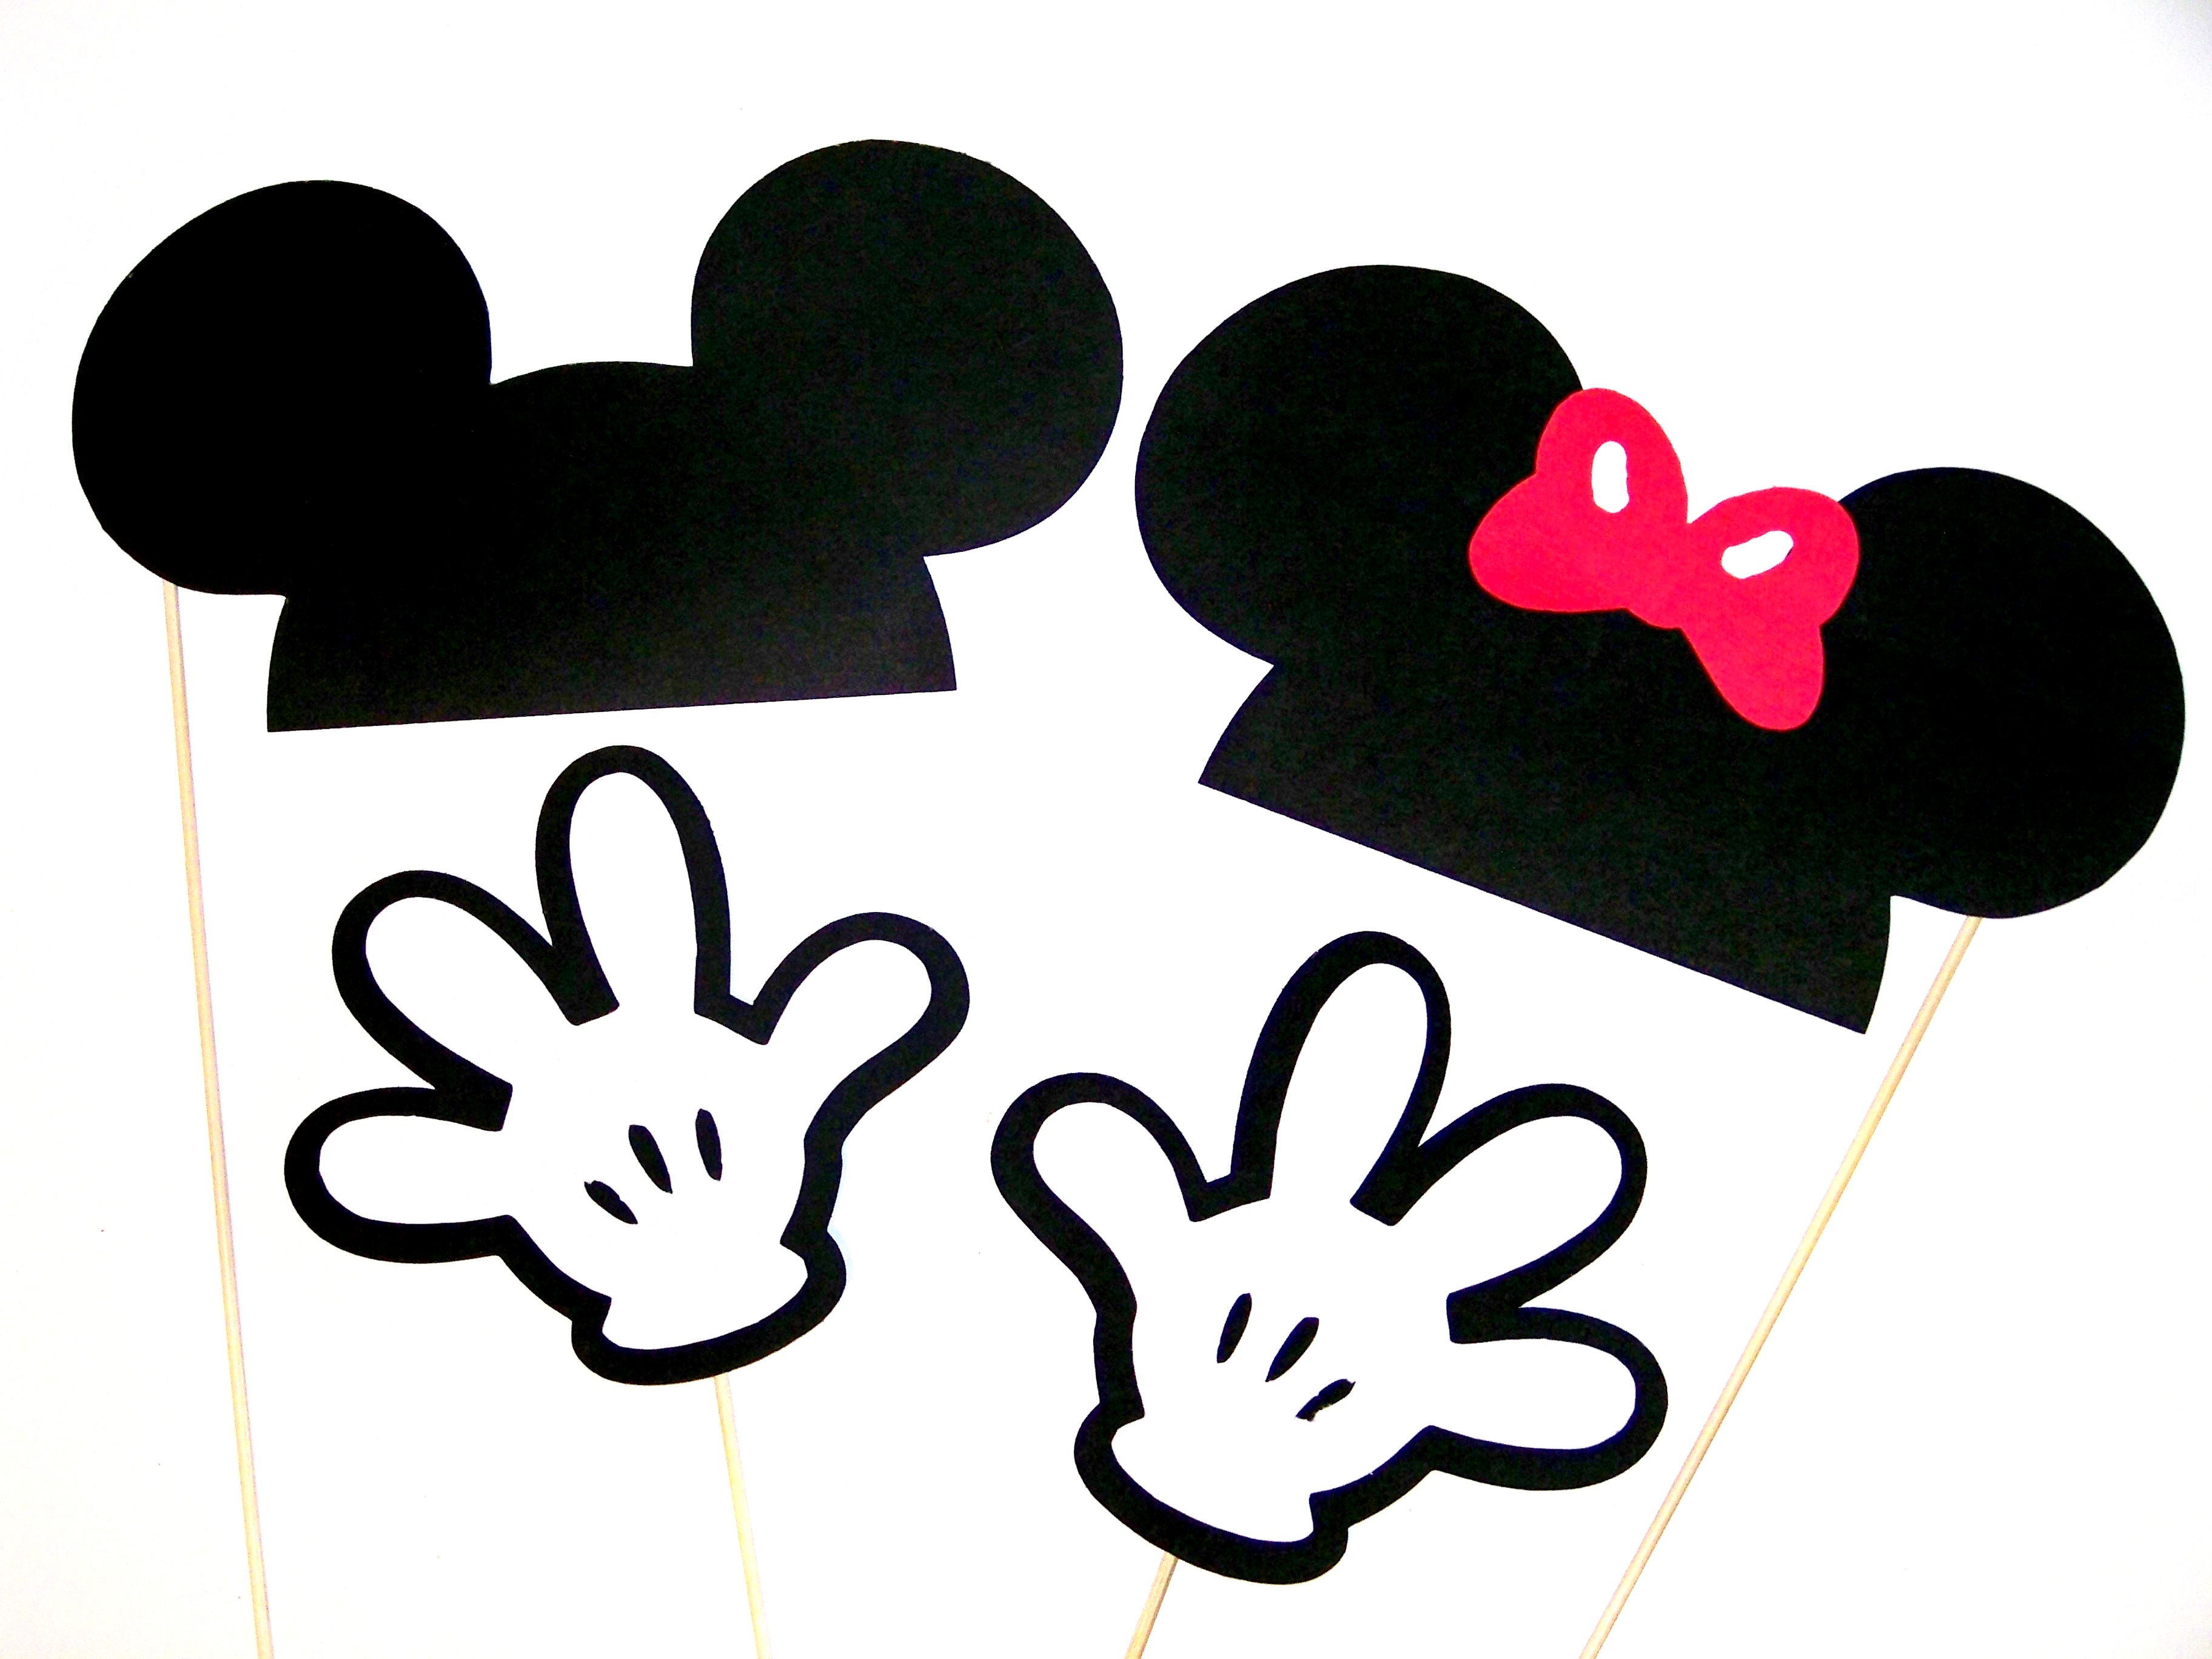 Mickey Mouse Hands Clipart